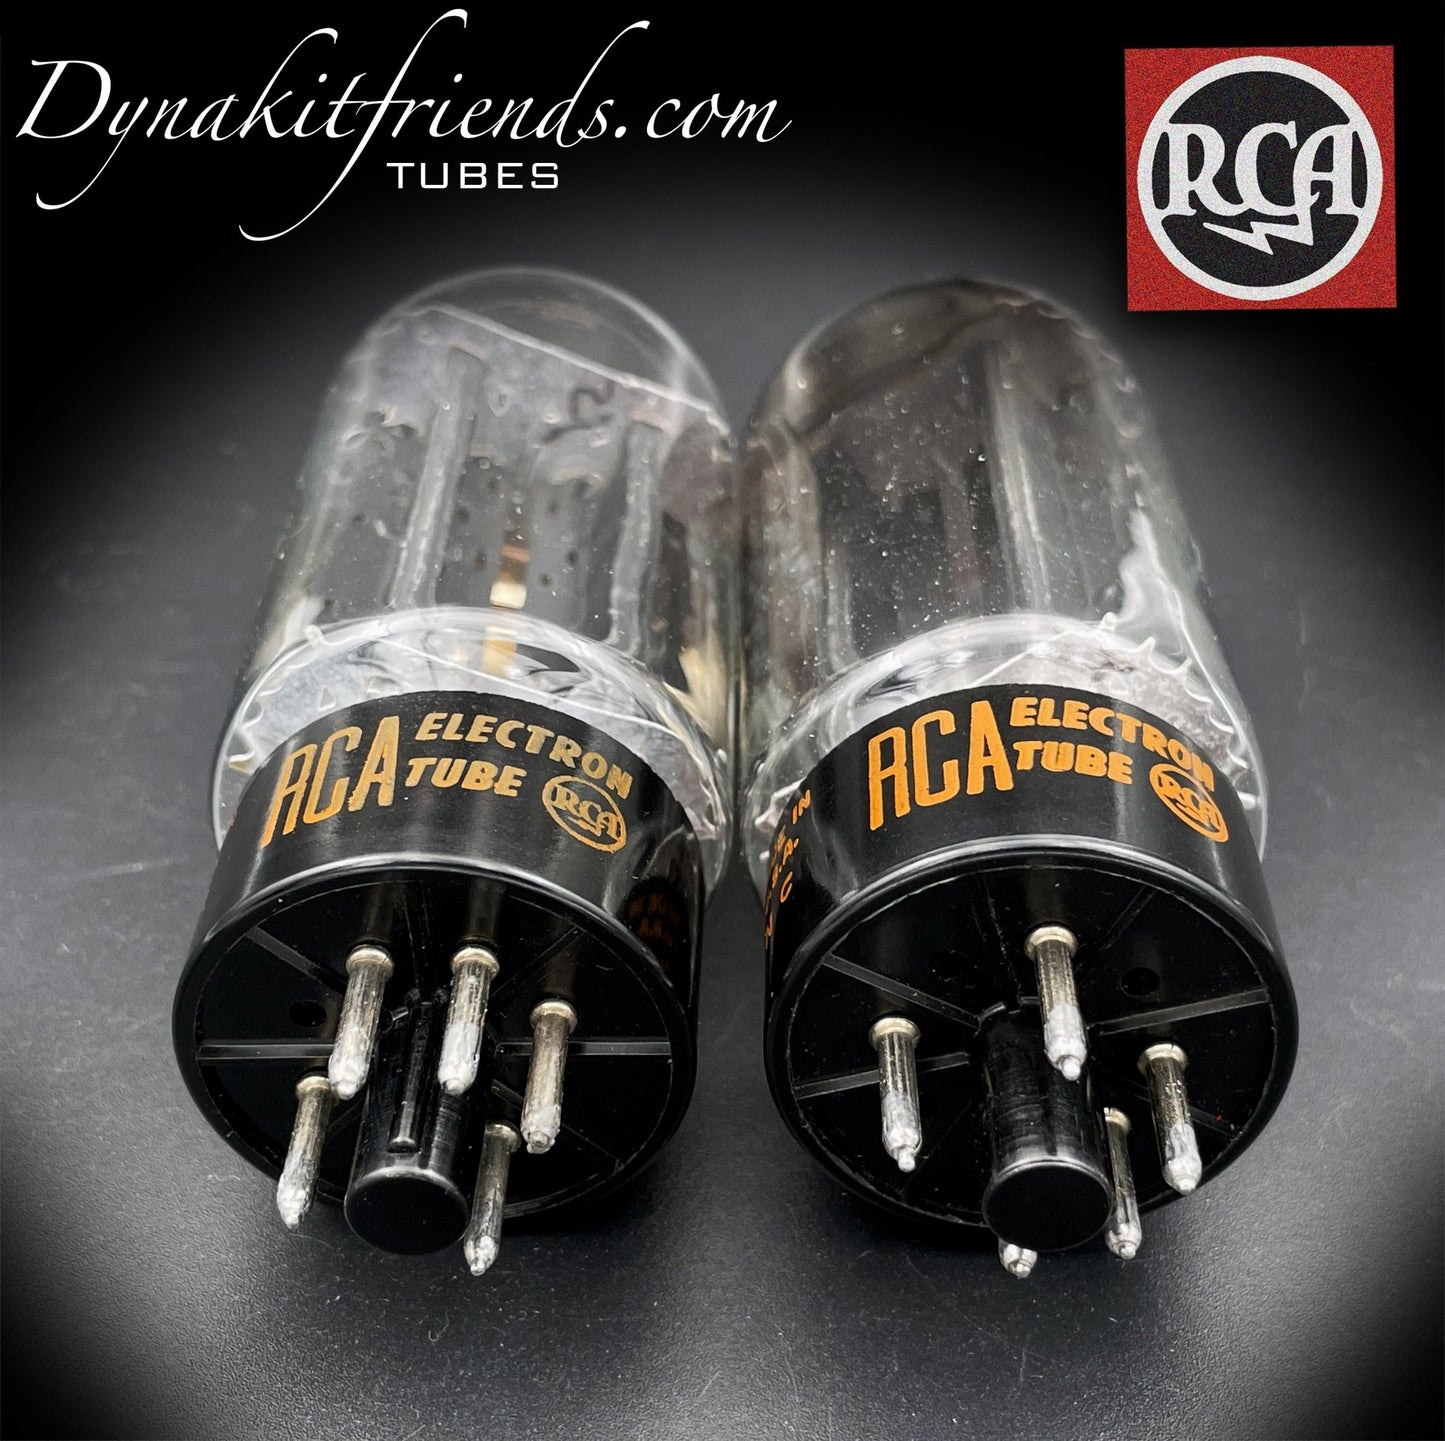 5U4GB ( 5AS4A ) RCA Black Plates Side Top [] Getter Matched Tubes Rectifiers Made in USA '60s - Vacuum Tubes Treasures